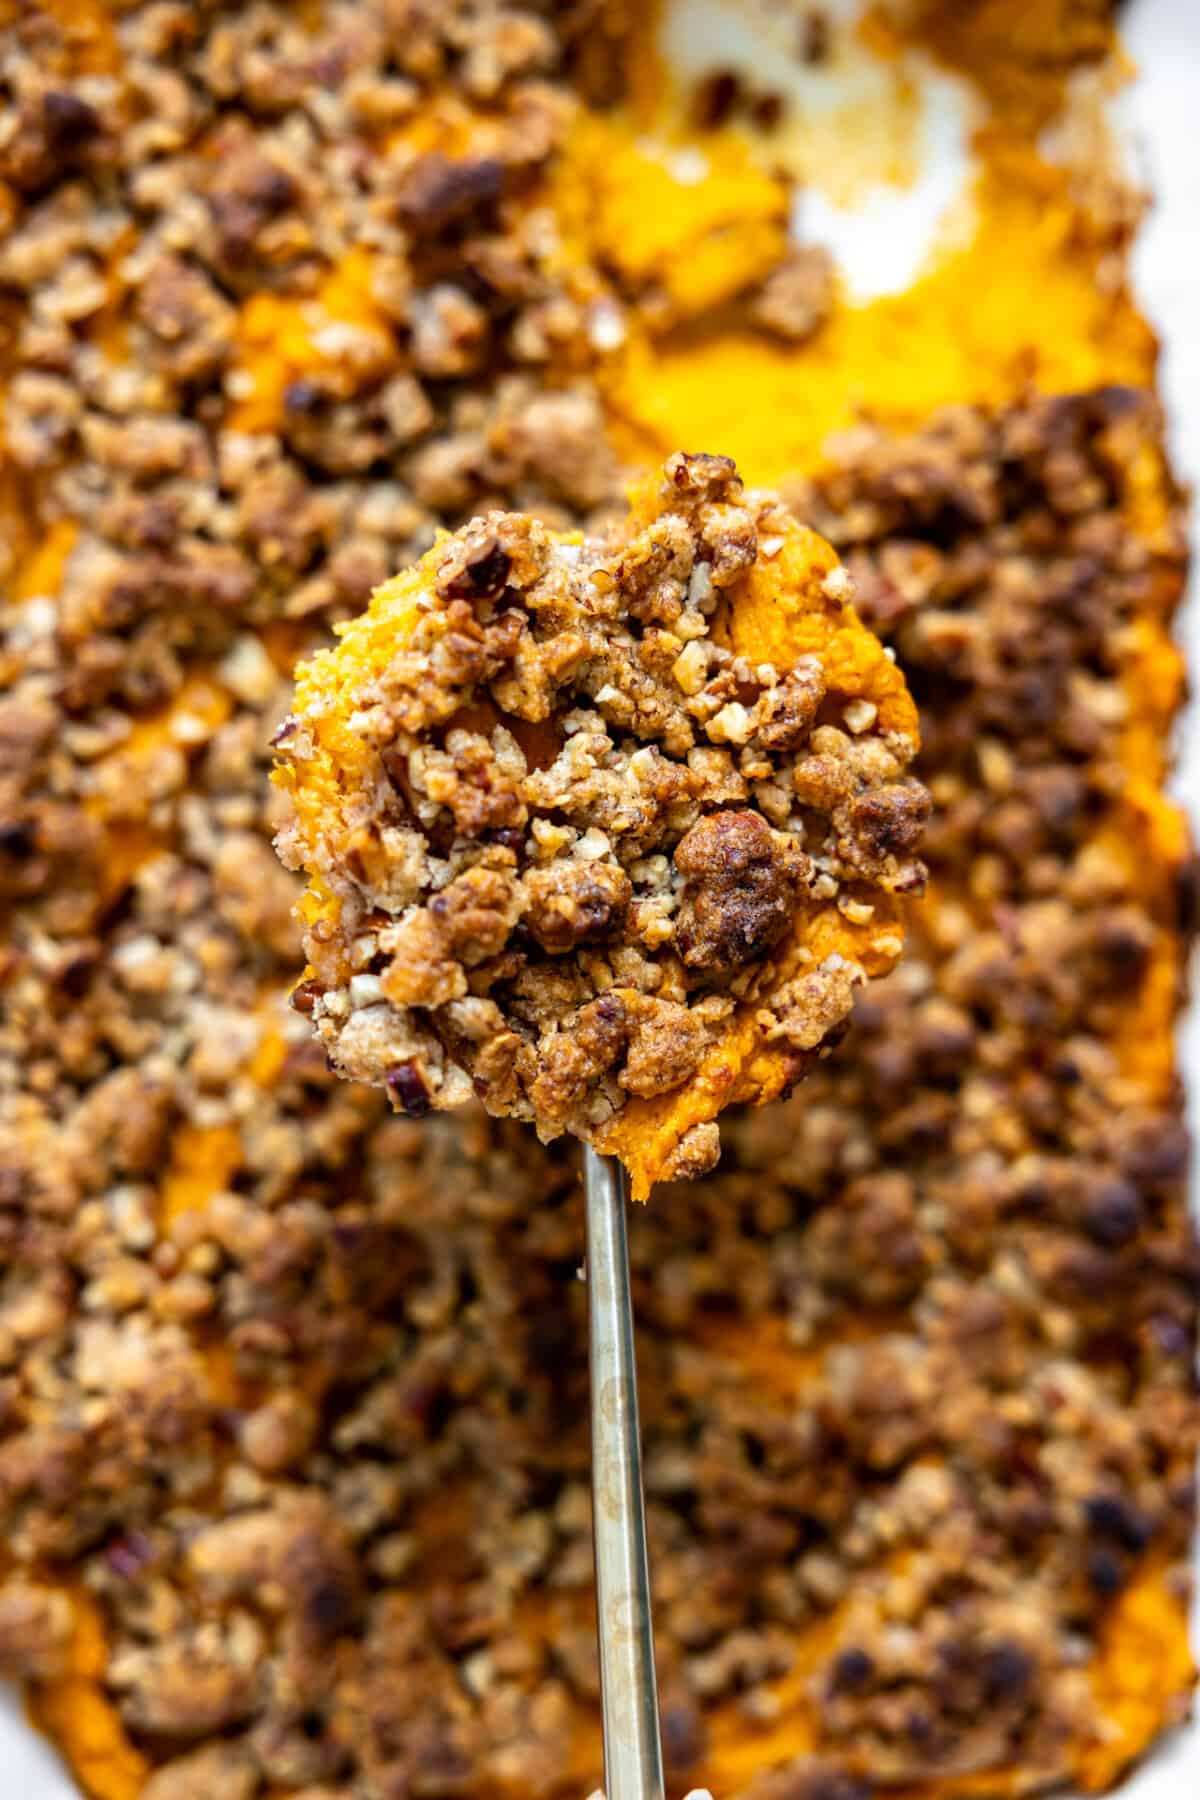 Spoon dishing up baked sweet potato casserole with crunchy pecan topping. 